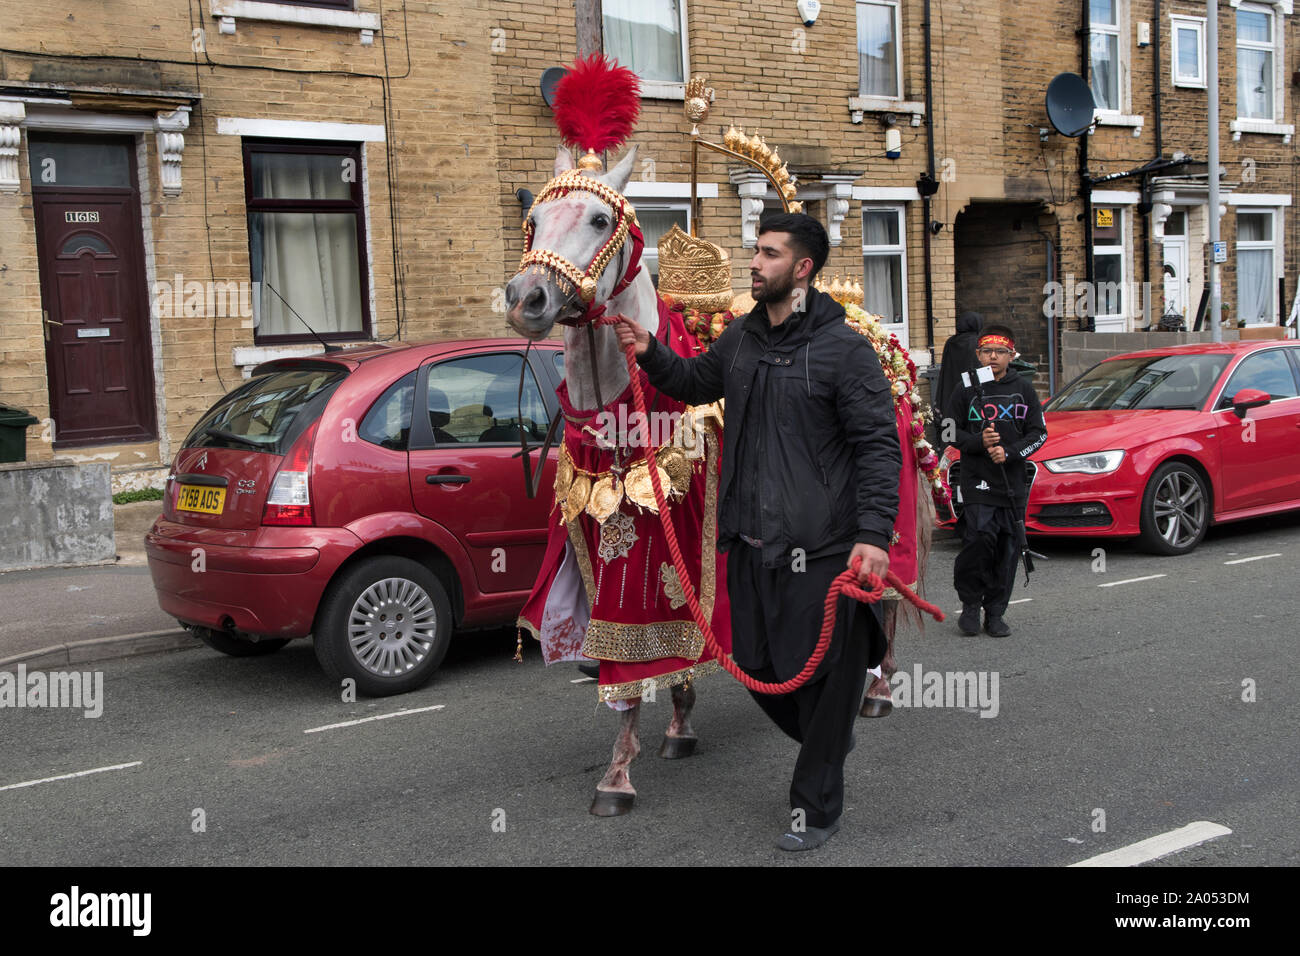 Muslim community Bradford 2019 2010s UK. Day of Ashura parade Shia Muslims  remember the martyrdom of Hussain. The horse represents the one that Husayn ibn Ali rode into  Battle of Karbala HOMER SYKES Stock Photo